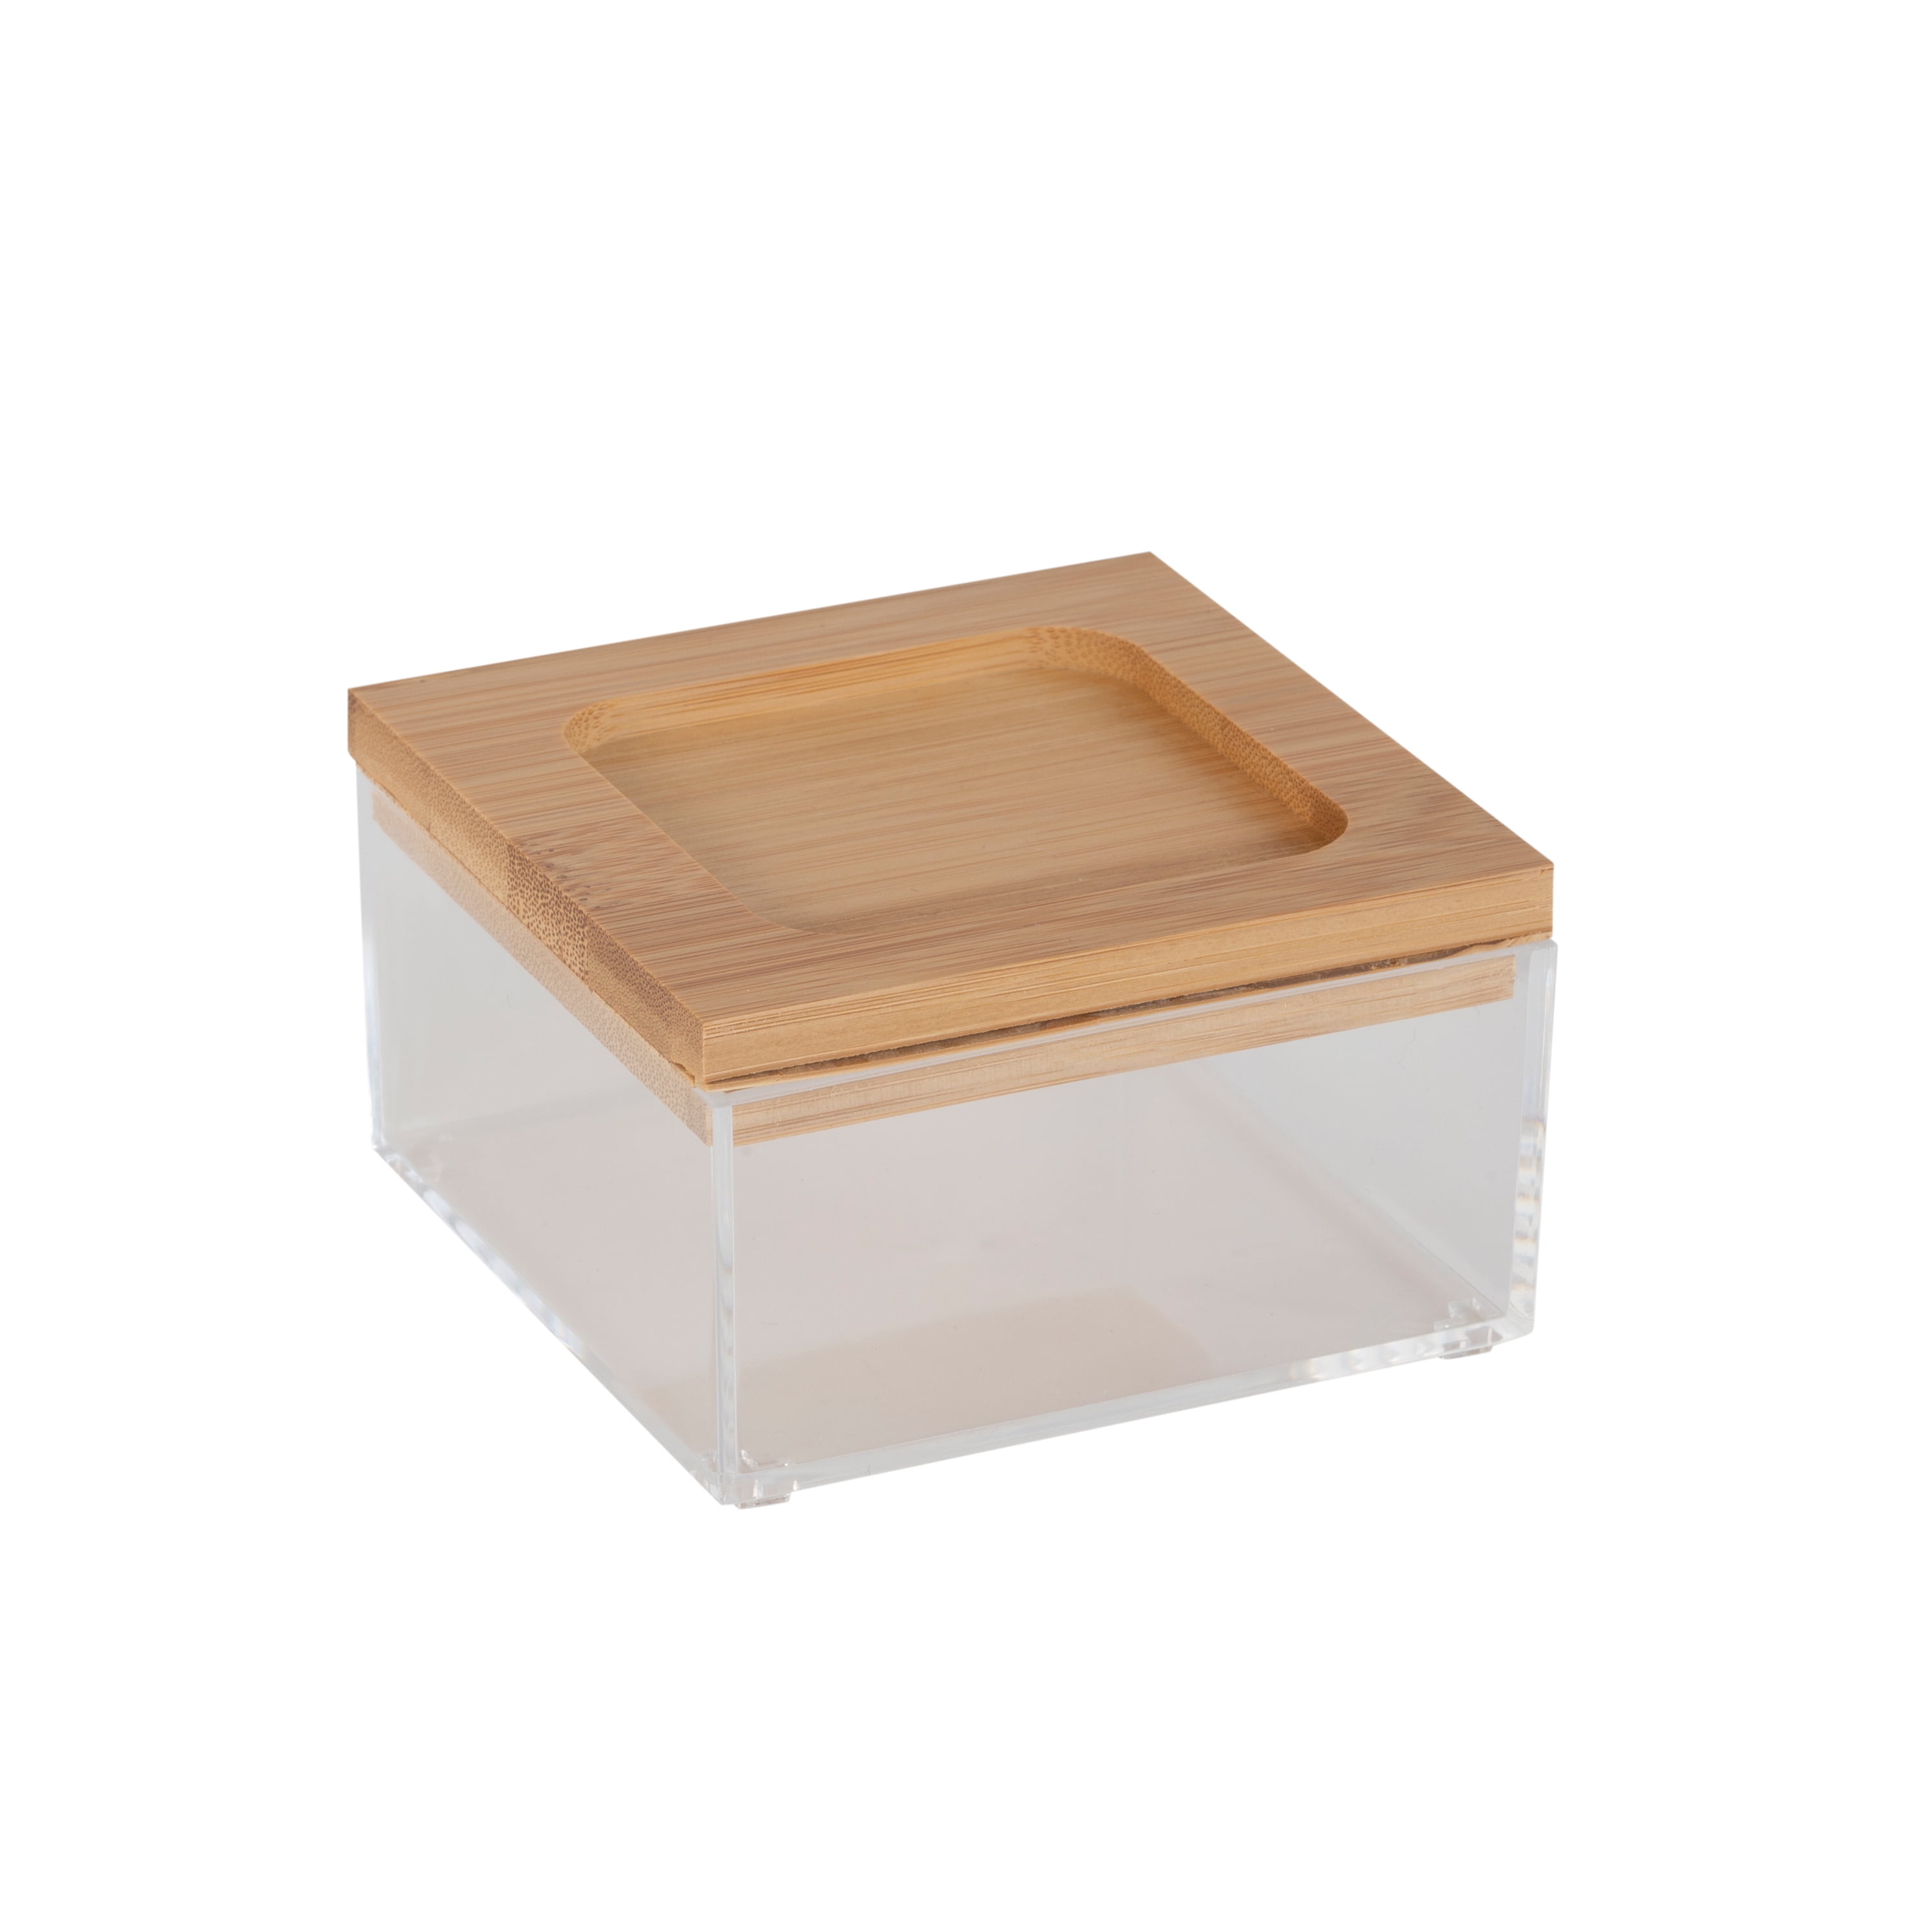 Oasis Home Storage Box, All Purpose Bin With Bamboo Lid